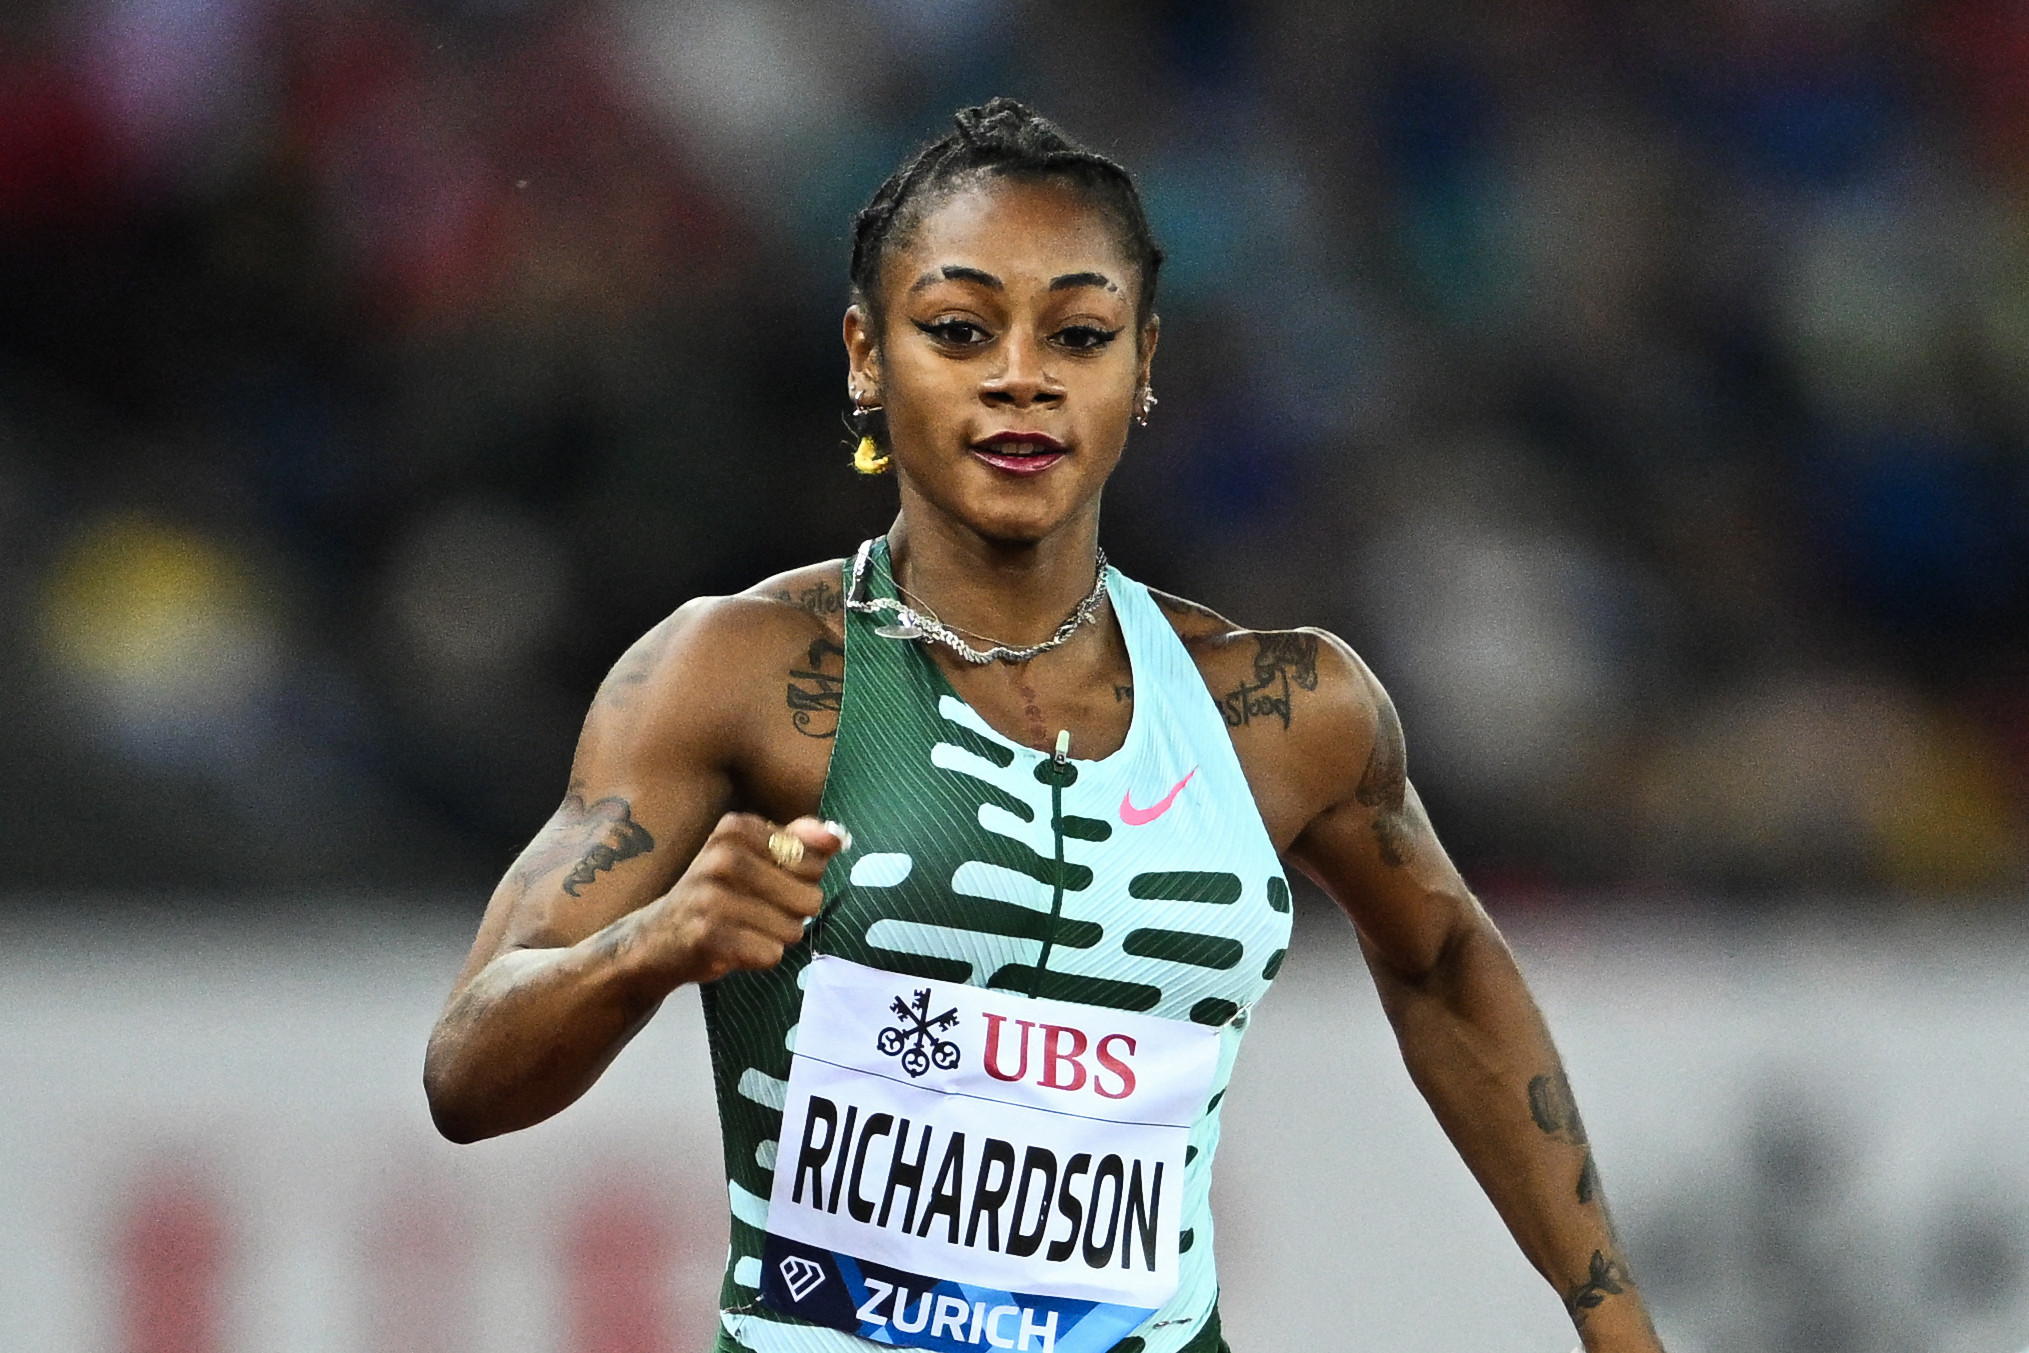 American sprinter Sha'Carri Richardson's absence from Tokyo 2020 for a positive cannabis test prompted debate over the drug's status within sport, but it remains prohibited in-competition by WADA ©Getty Images